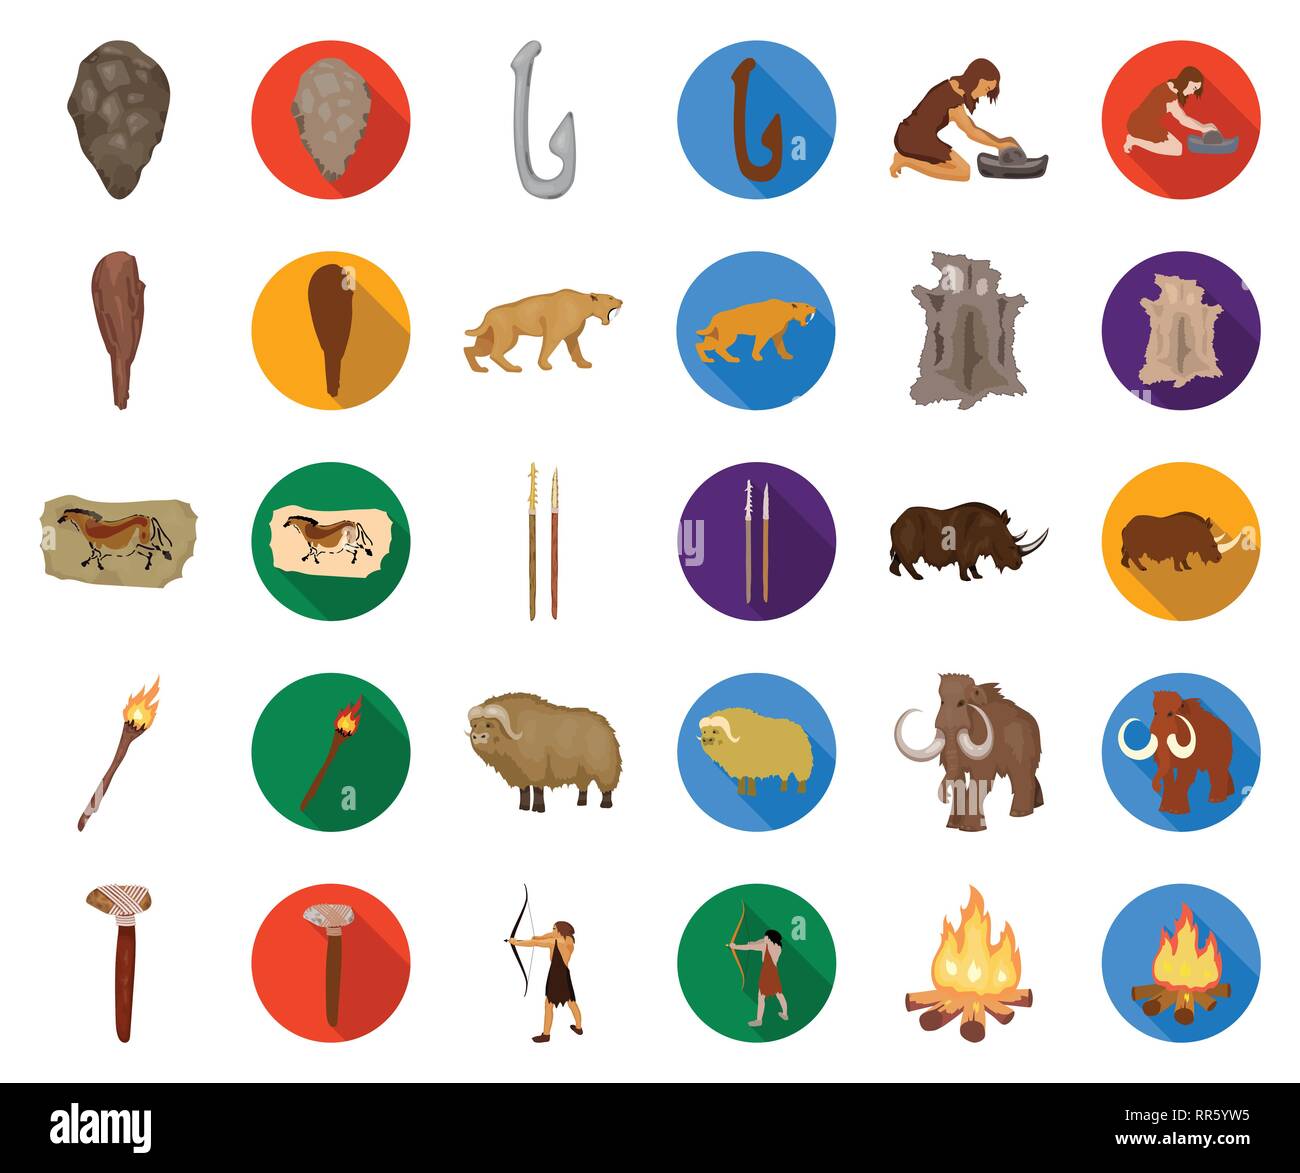 age,ancient,animal,antiquity,arrow,axe,beginning,bone,bow,campfire,cartoon,flat,caveman,cavewoman,collection,culture,design,development,epoch,fauna,fish,grindstone,hide,hook,humanity,icon,illustration,isolated,life,logo,man,muskox,painting,people,period,rhinoceros,saber-toothed,set,sign,spears,stone,survival,symbol,tiger,tool,torch,truncheon,vector,venus,web,woolly mammoth Vector Vectors , Stock Vector